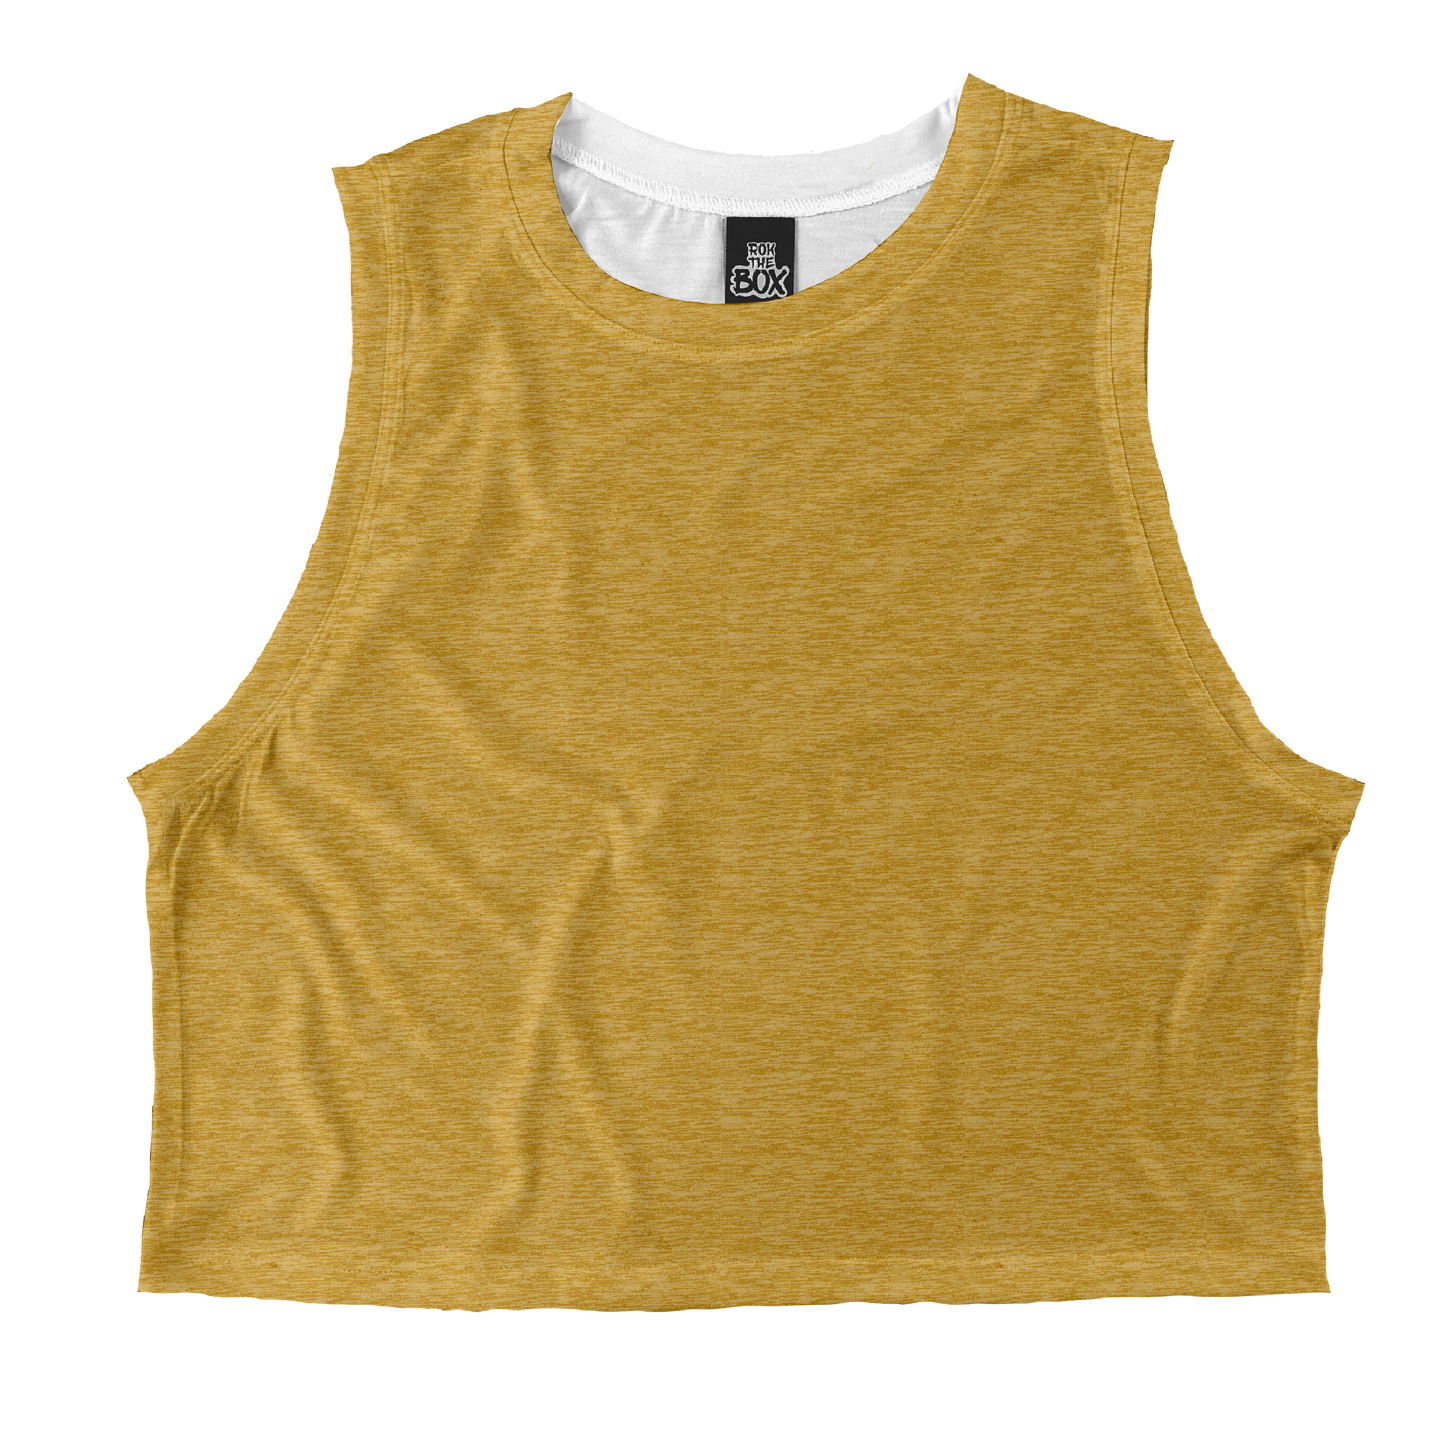 Gold Heathered Tops